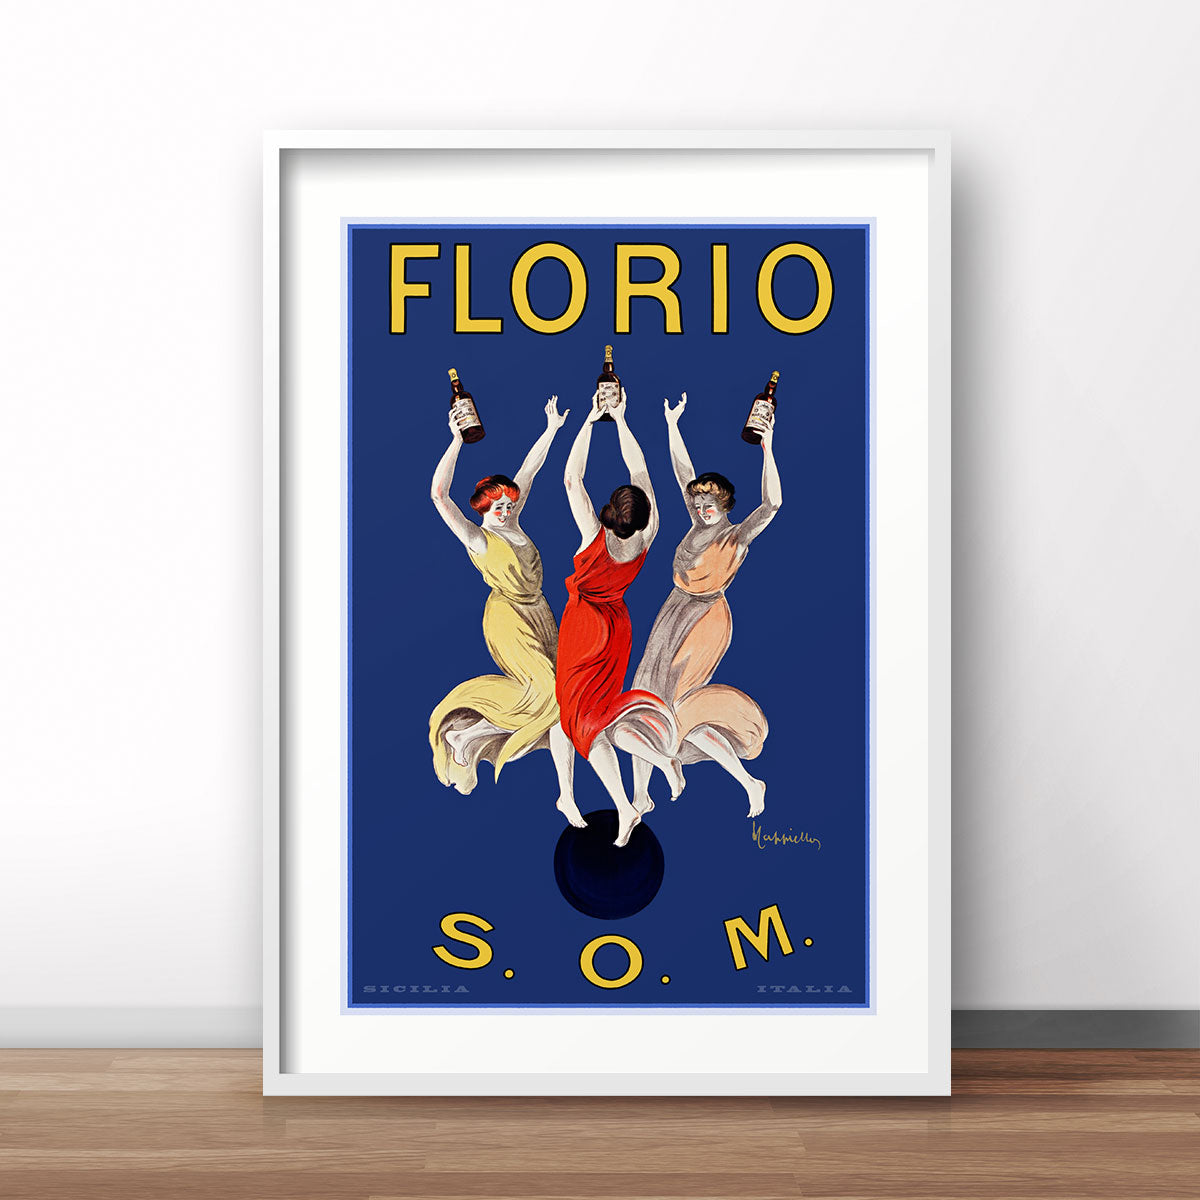 Florio Marsala vintage retro advertising poster print from Places We Luv